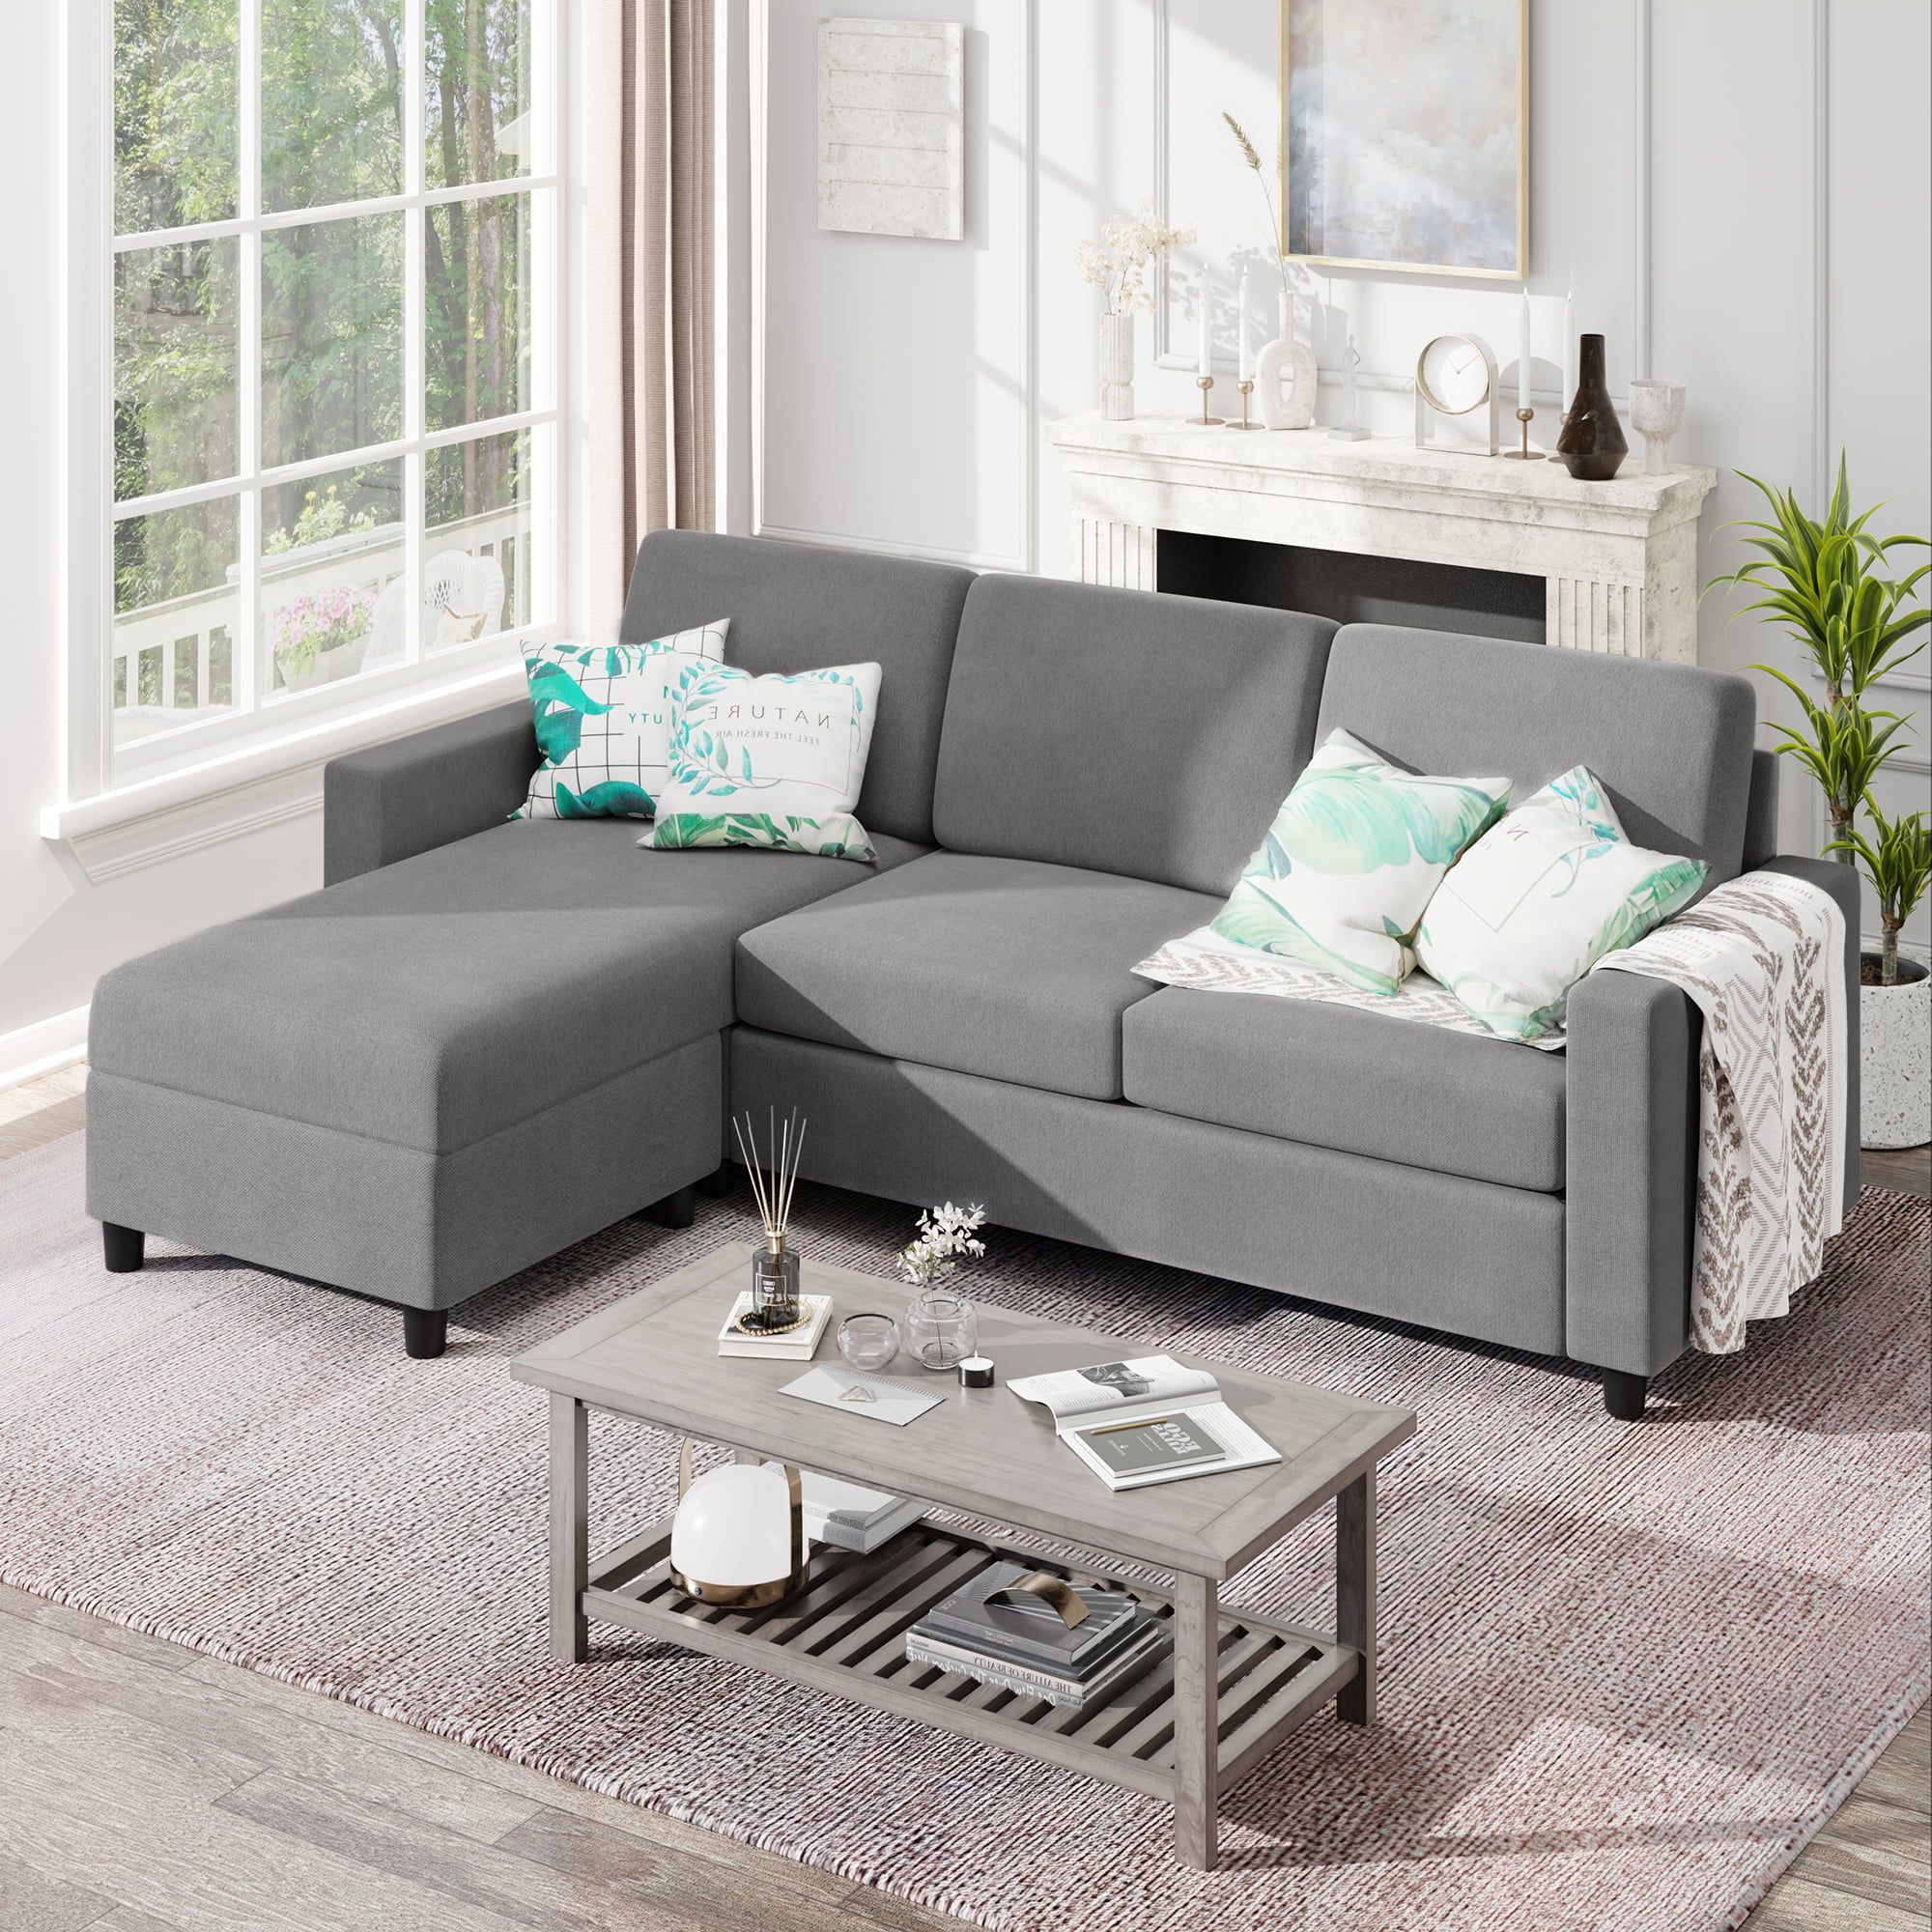 Sobaniilo Convertible Sectional Sofa Couch, Modern Linen Fabric L Shaped  3 Seat Sofa Sectional With Reversible Chaise For Small Space (black) –  Walmart Pertaining To Modern Linen Fabric L Shaped Couches (Gallery 1 of 20)